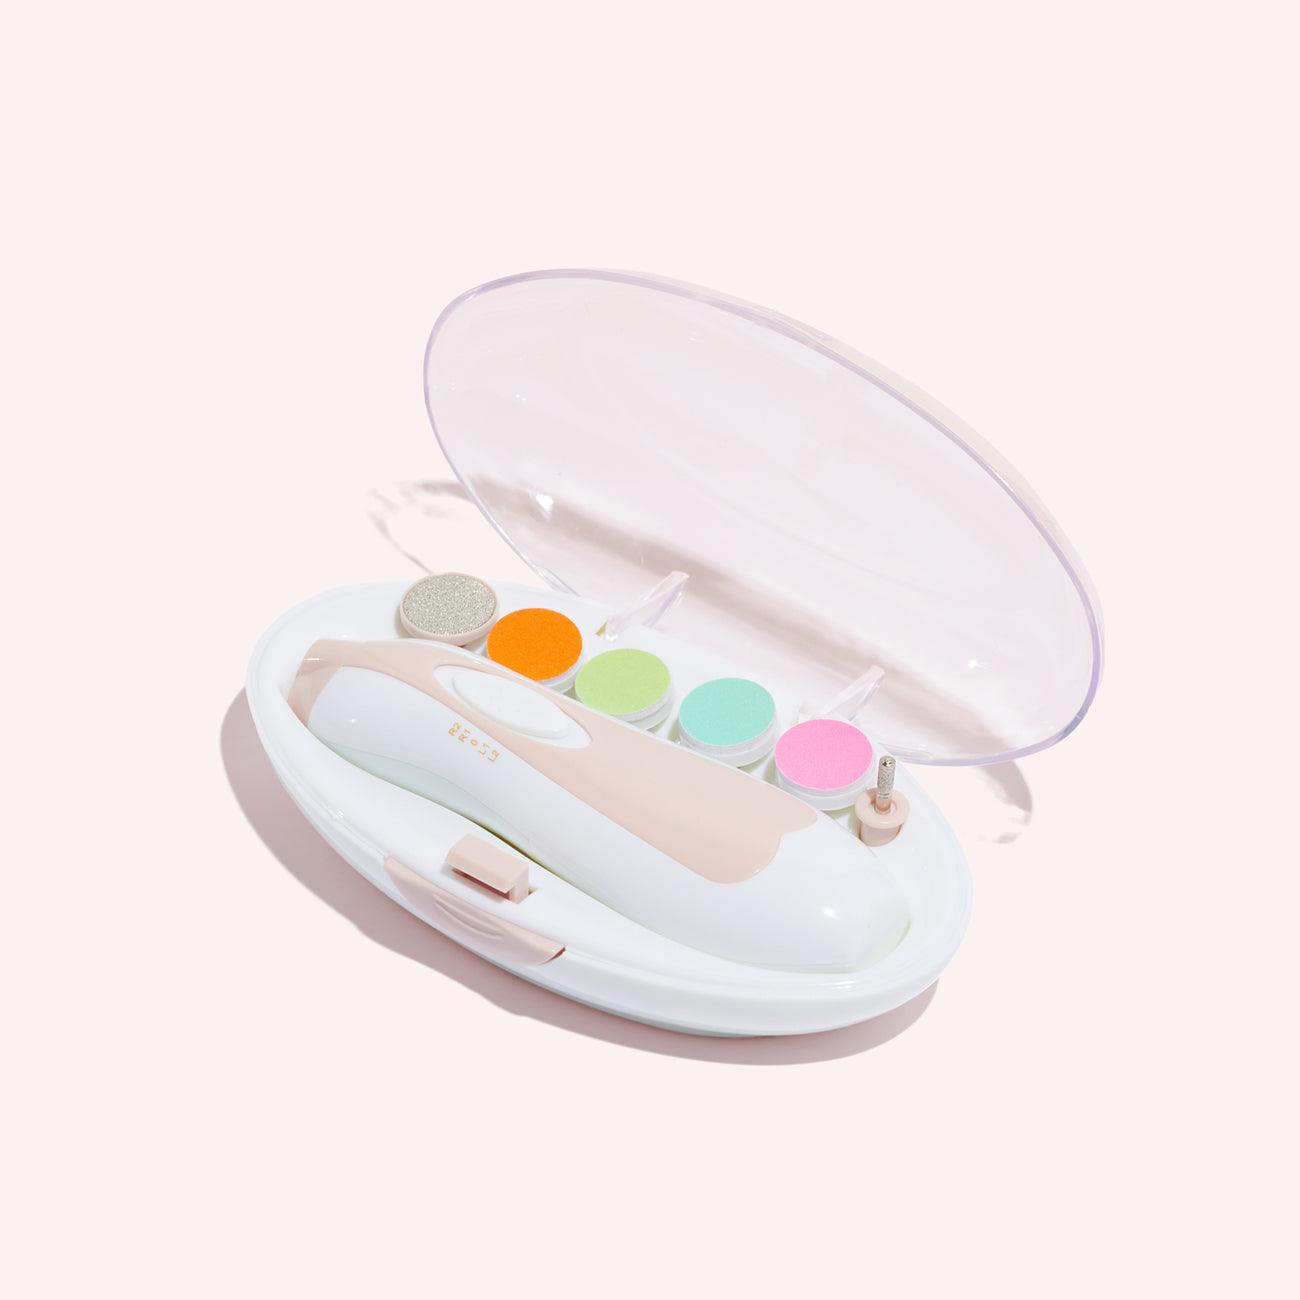 The Baby Care Set